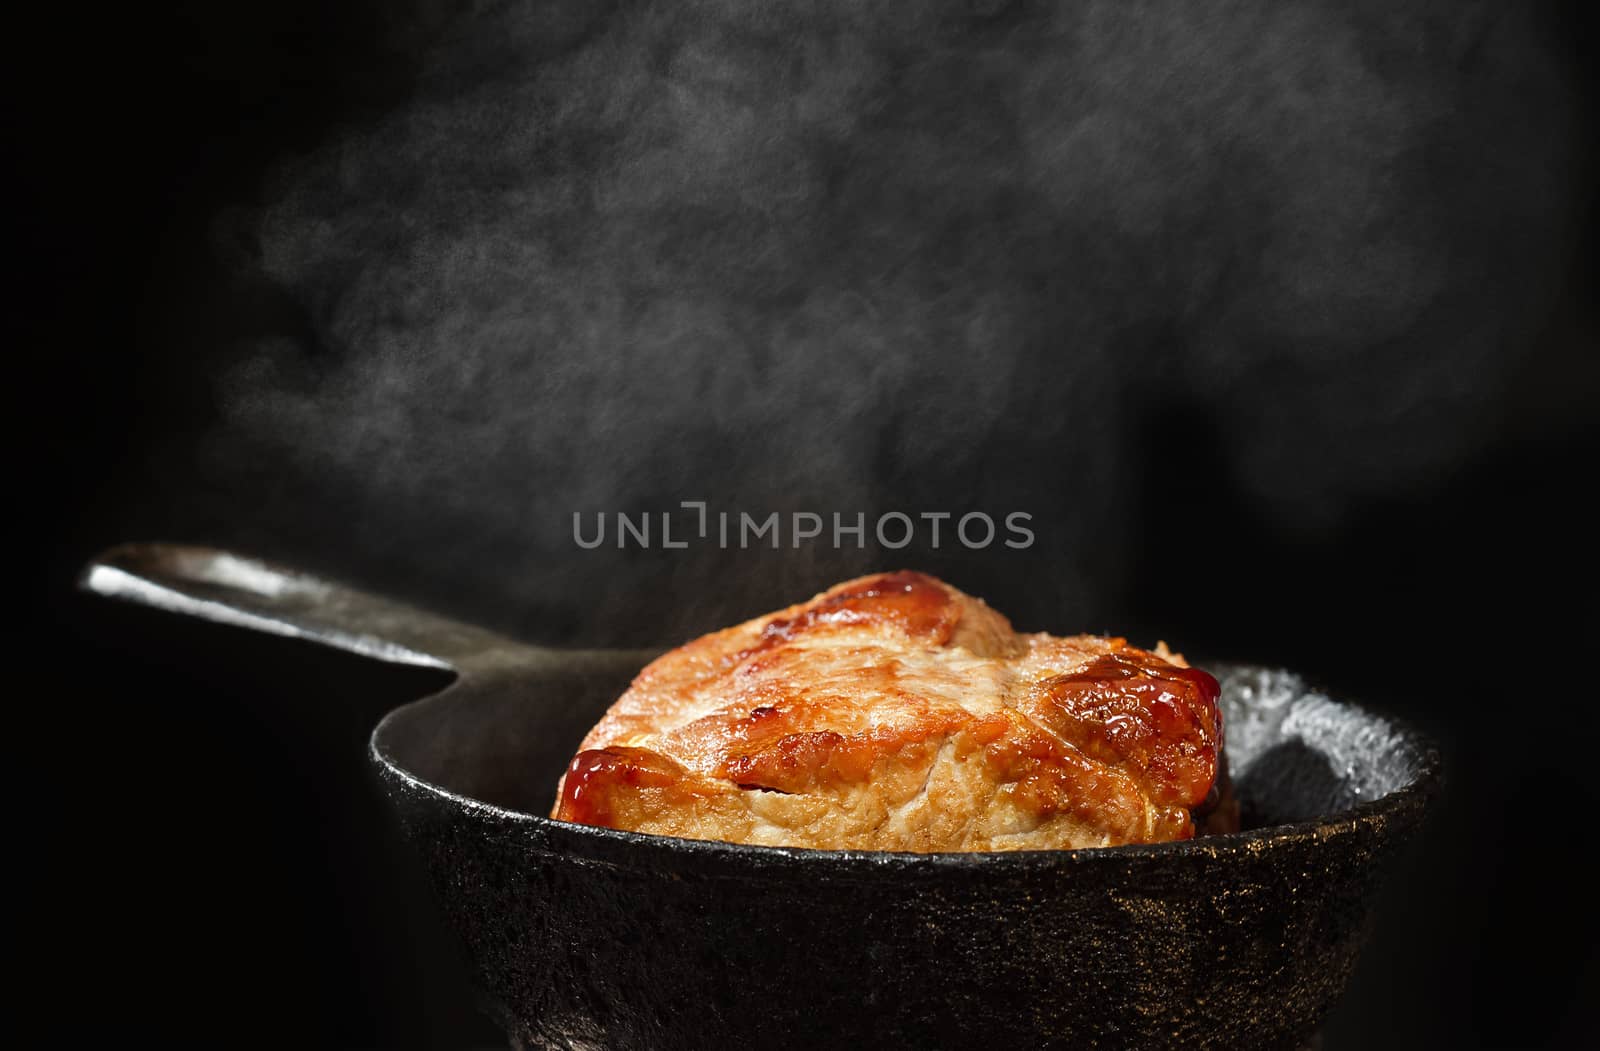 Pork fried on a cast iron skillet, a big piece. Black background and couples